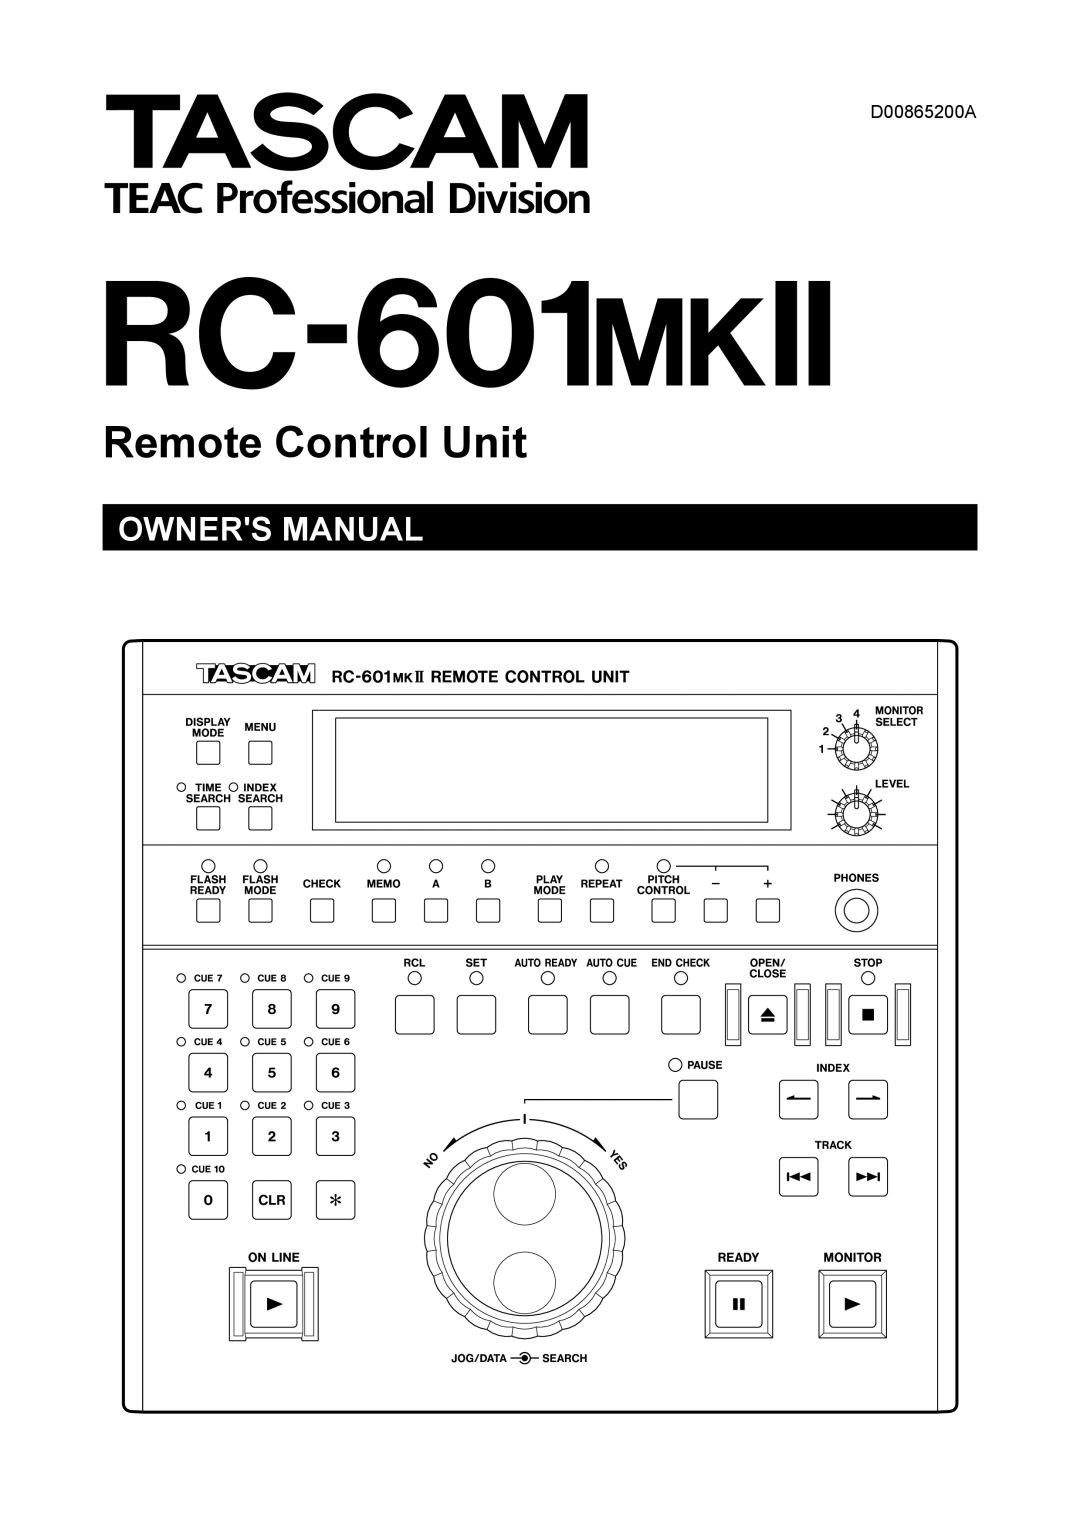 Tascam RC-601mkII owner manual D00865200A, RC-601MKII, Remote Control Unit, Owners Manual 